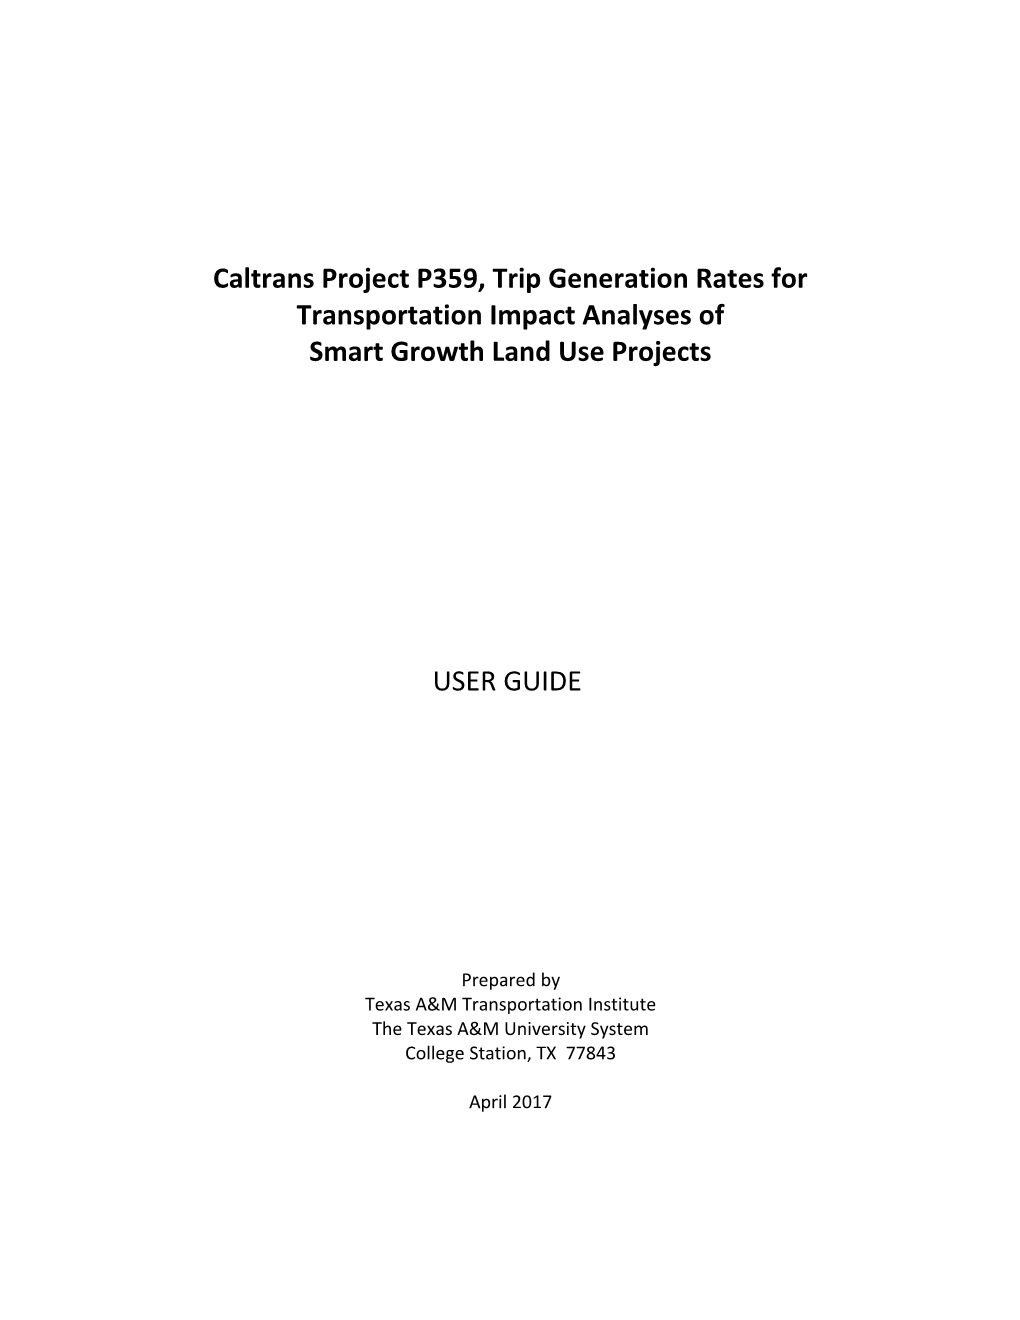 Caltrans Project P359, Trip Generation Rates for Transportation Impact Analyses Of